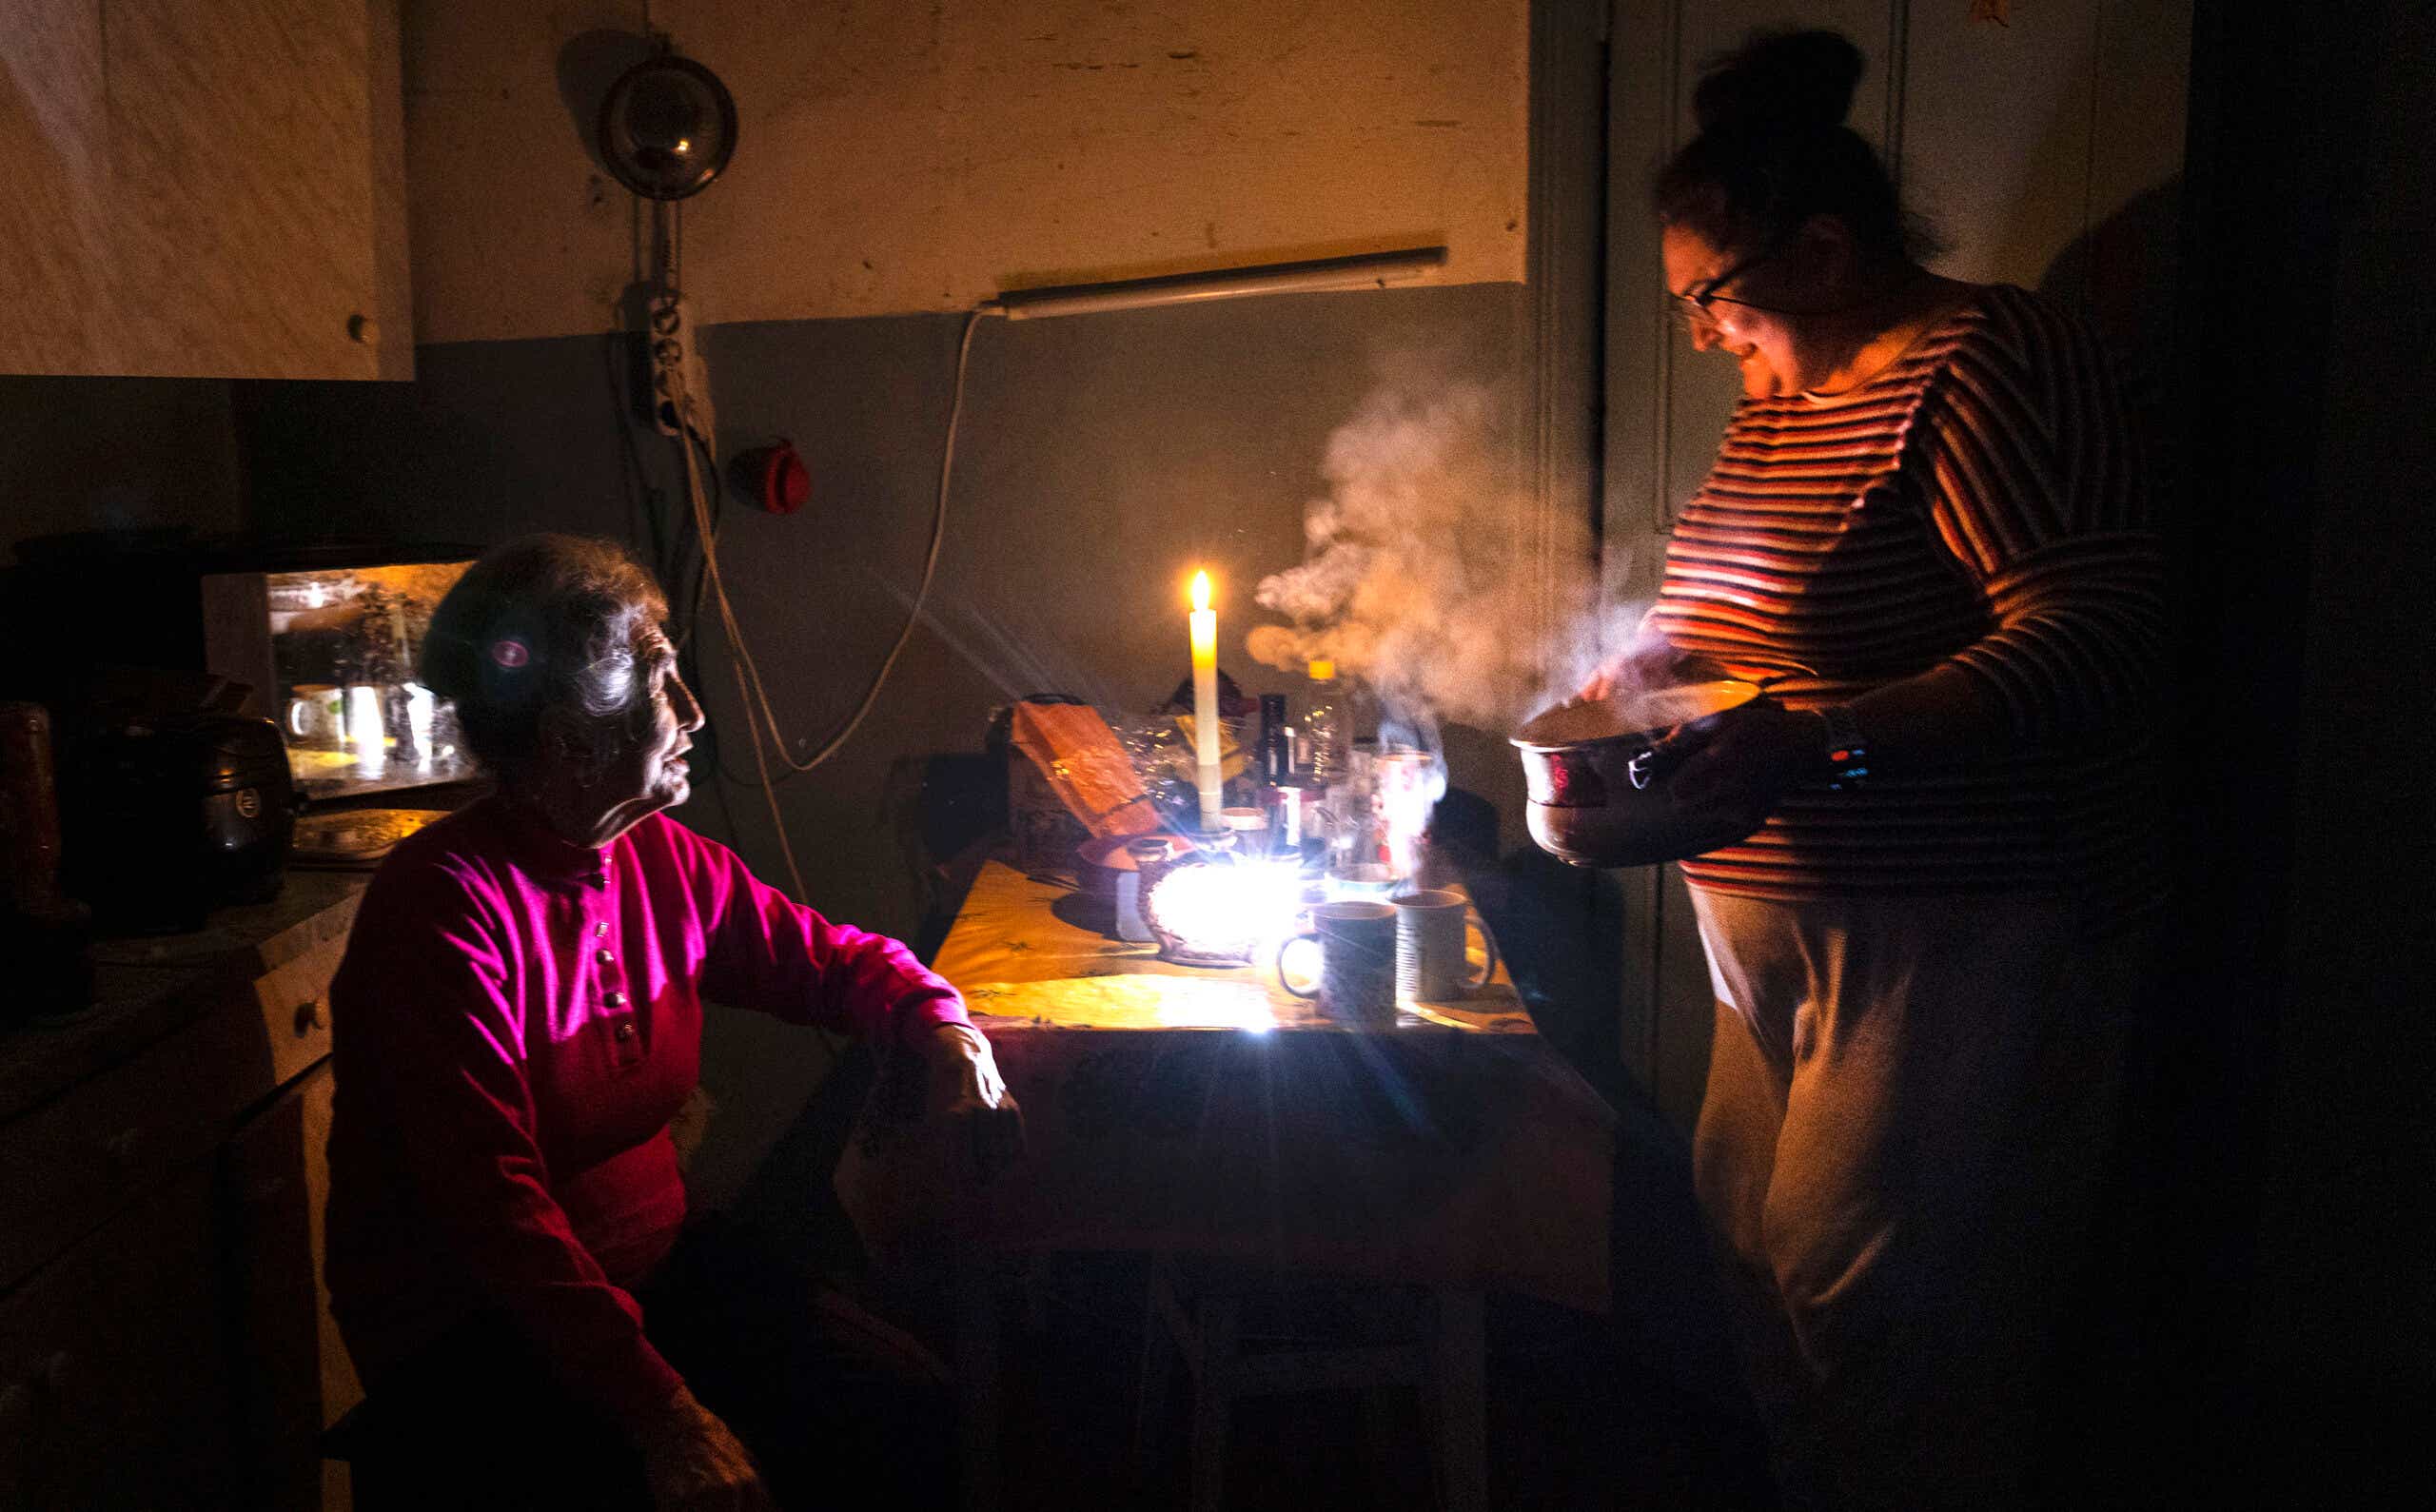 A Ukrainian mother and daughter make tea during the Kyiv power outage